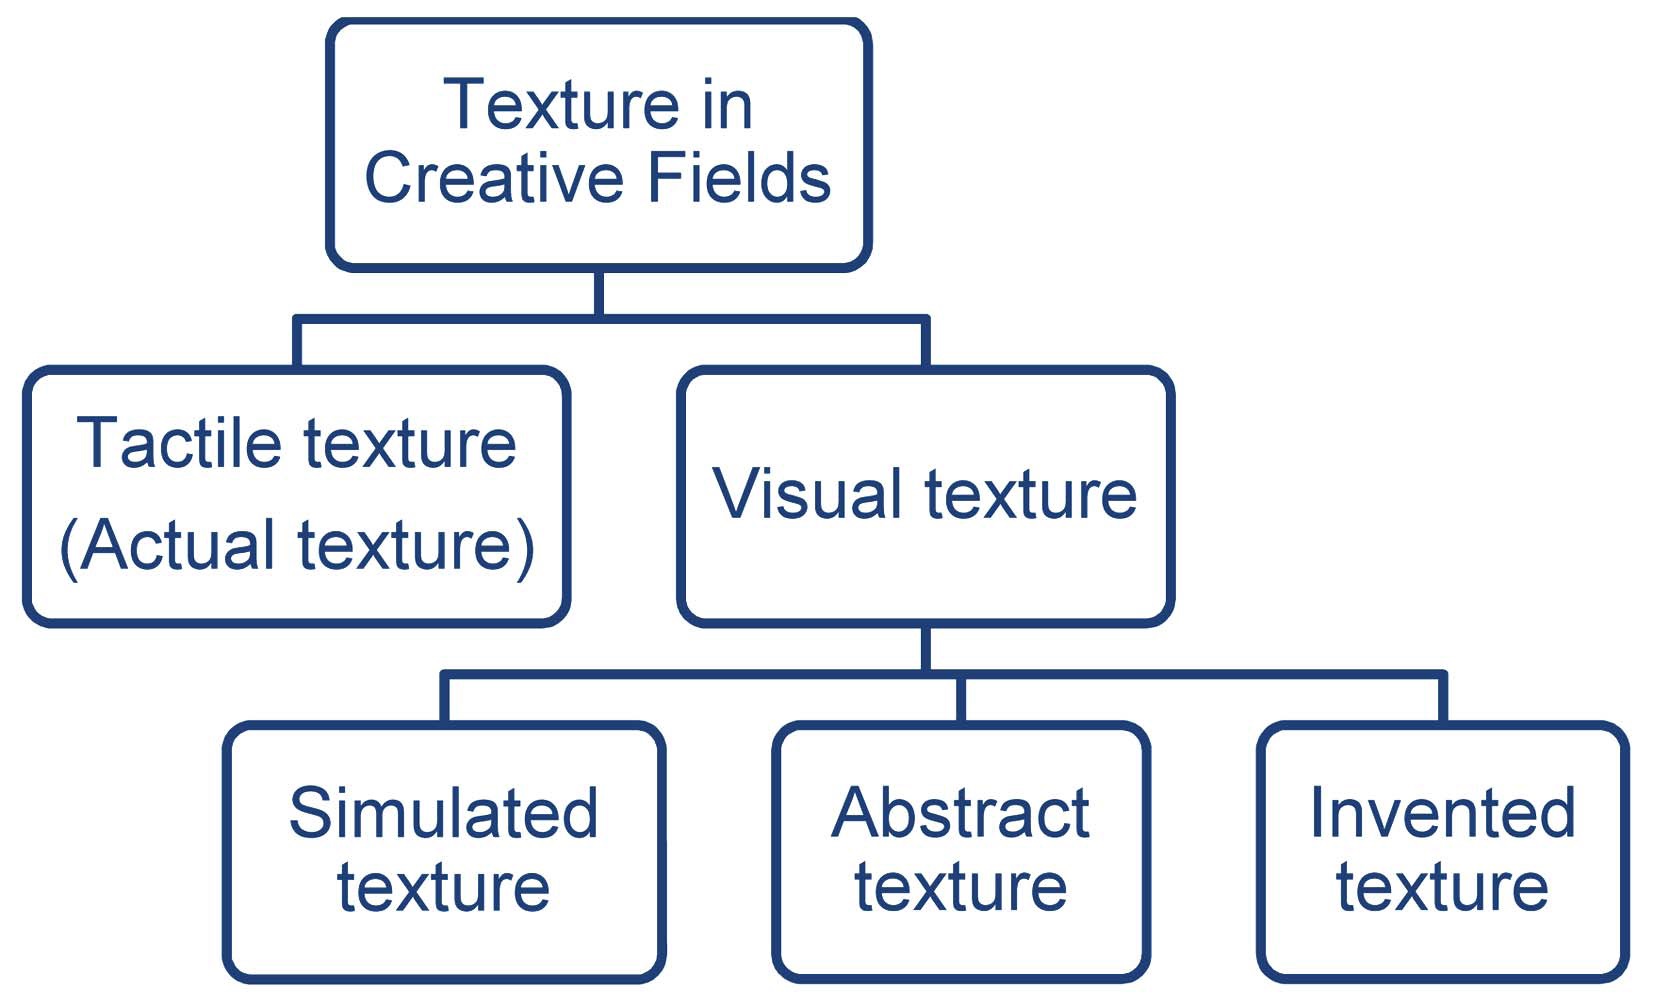 Categorization of texture in visual art and designs.